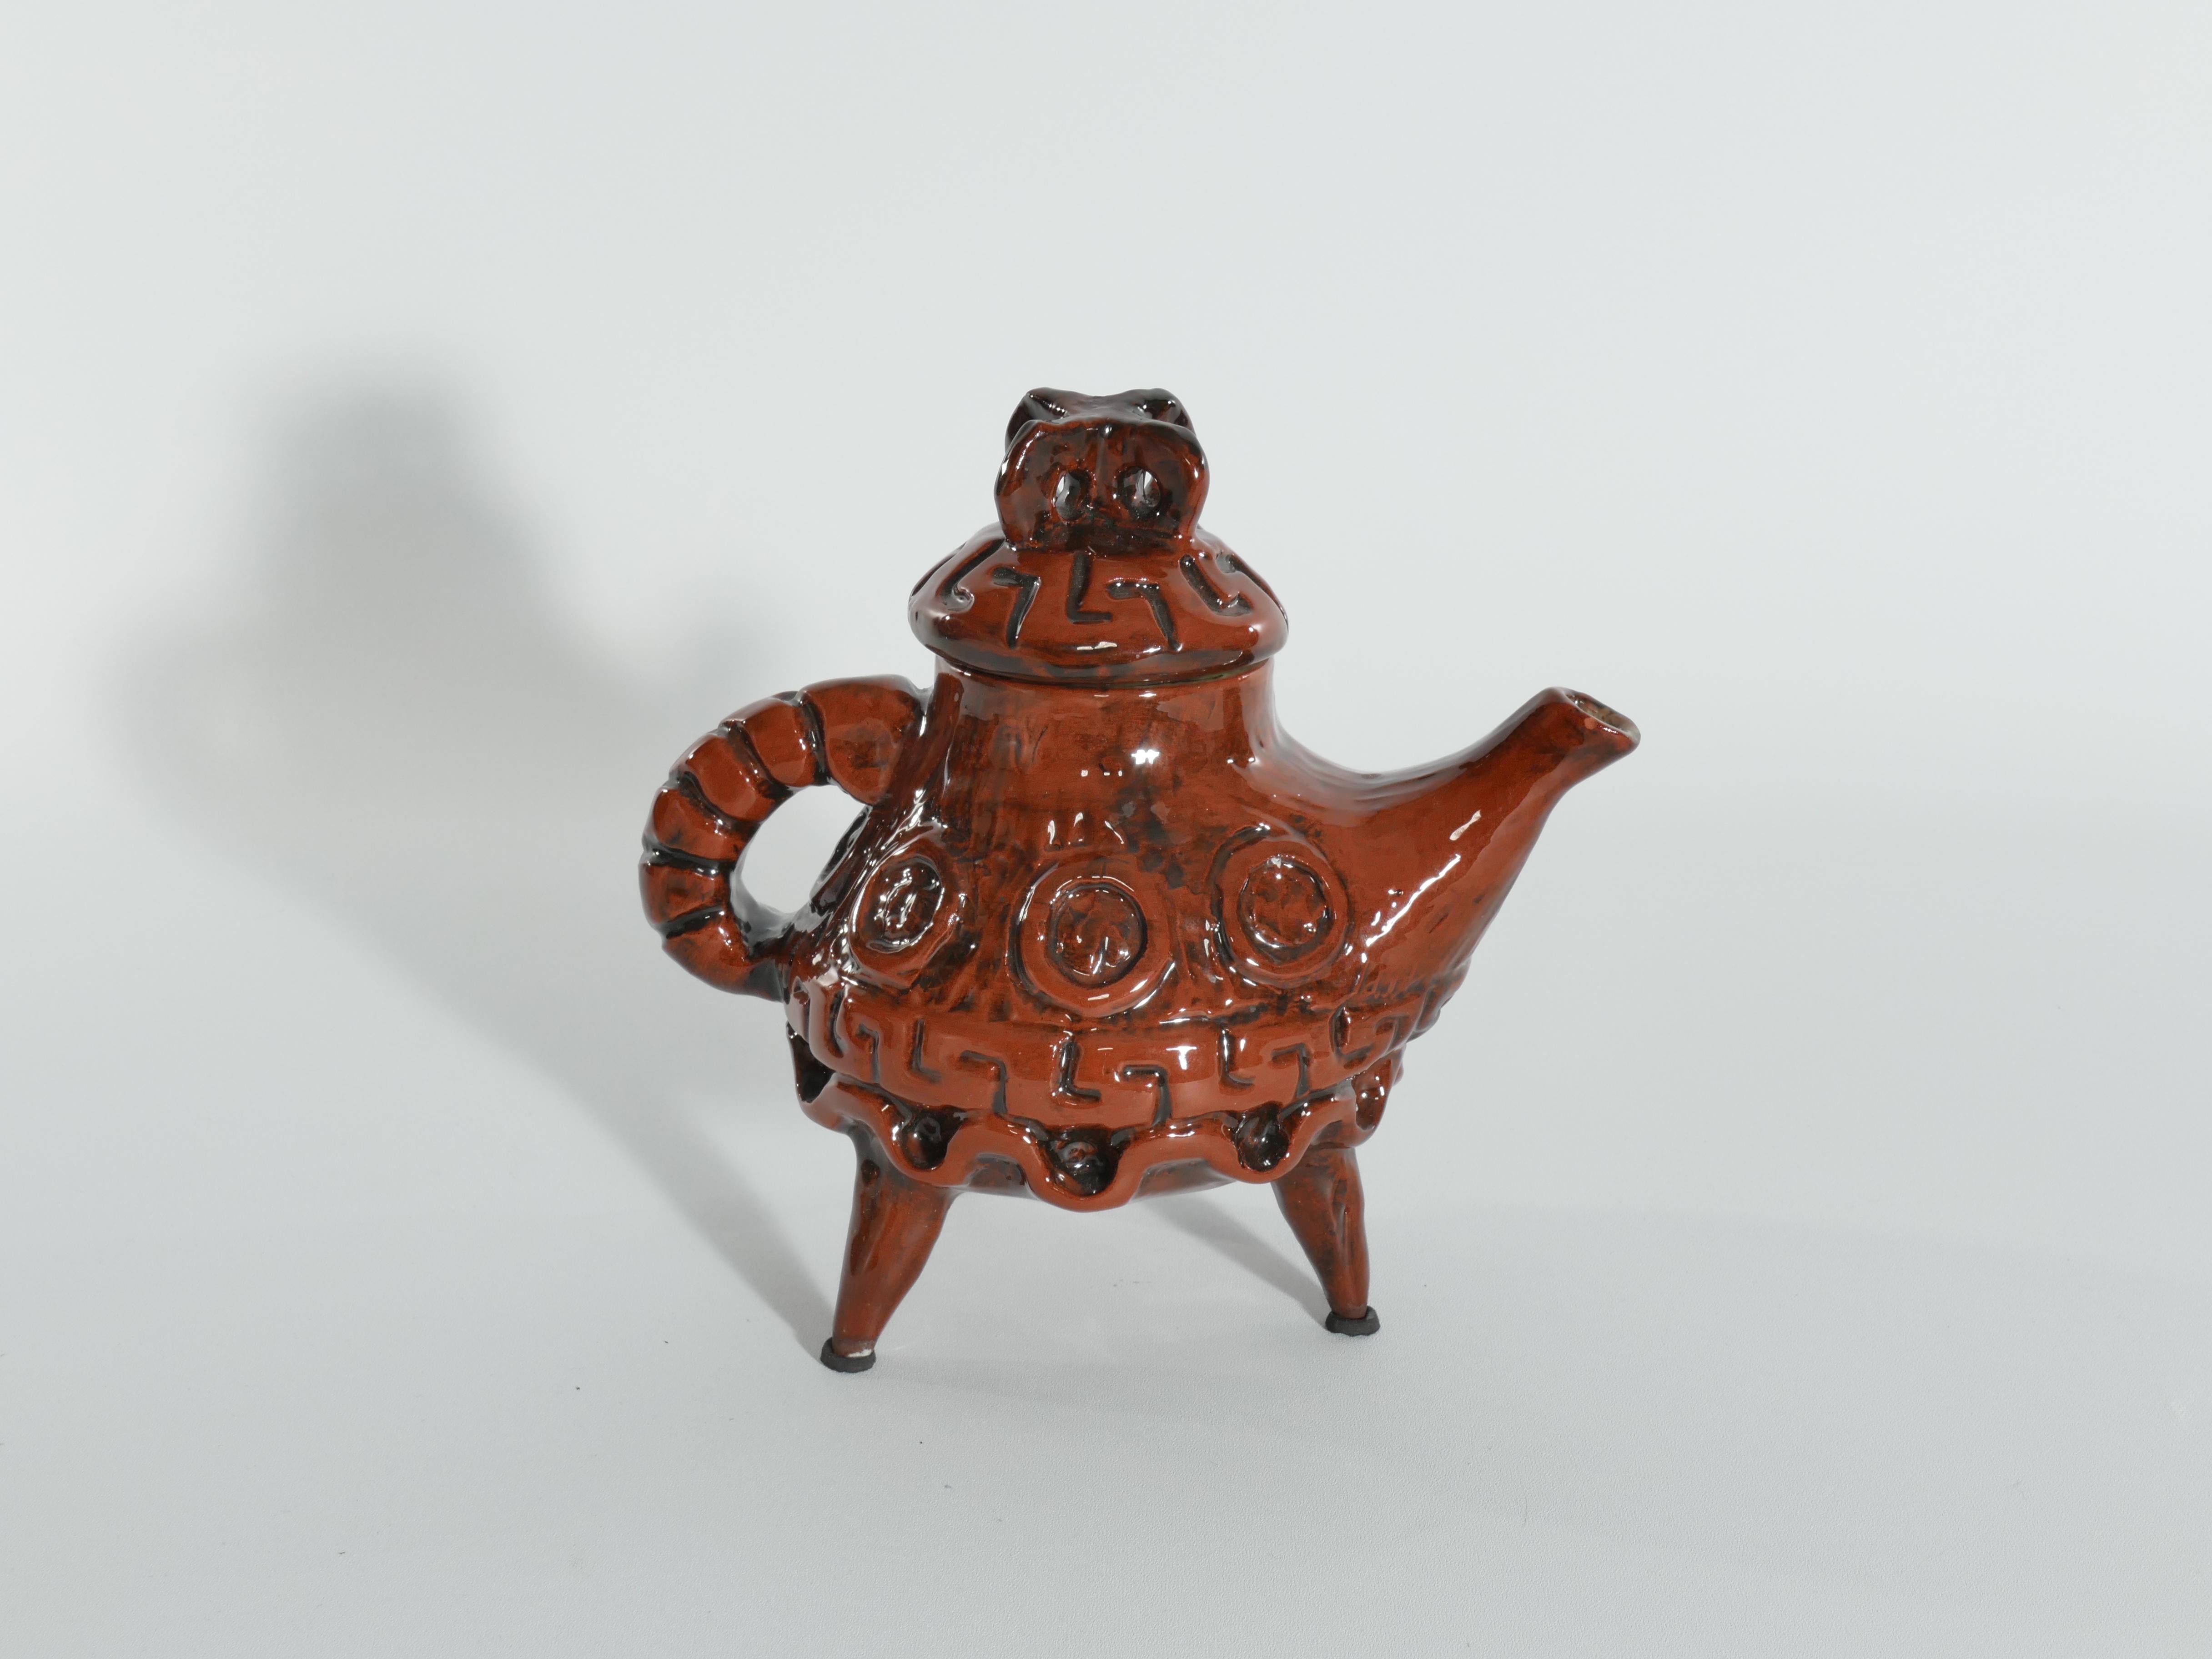 Folk Art Vintage Playful Teapot with Crab-like Features by Allan Hellman Sweden 1982  For Sale